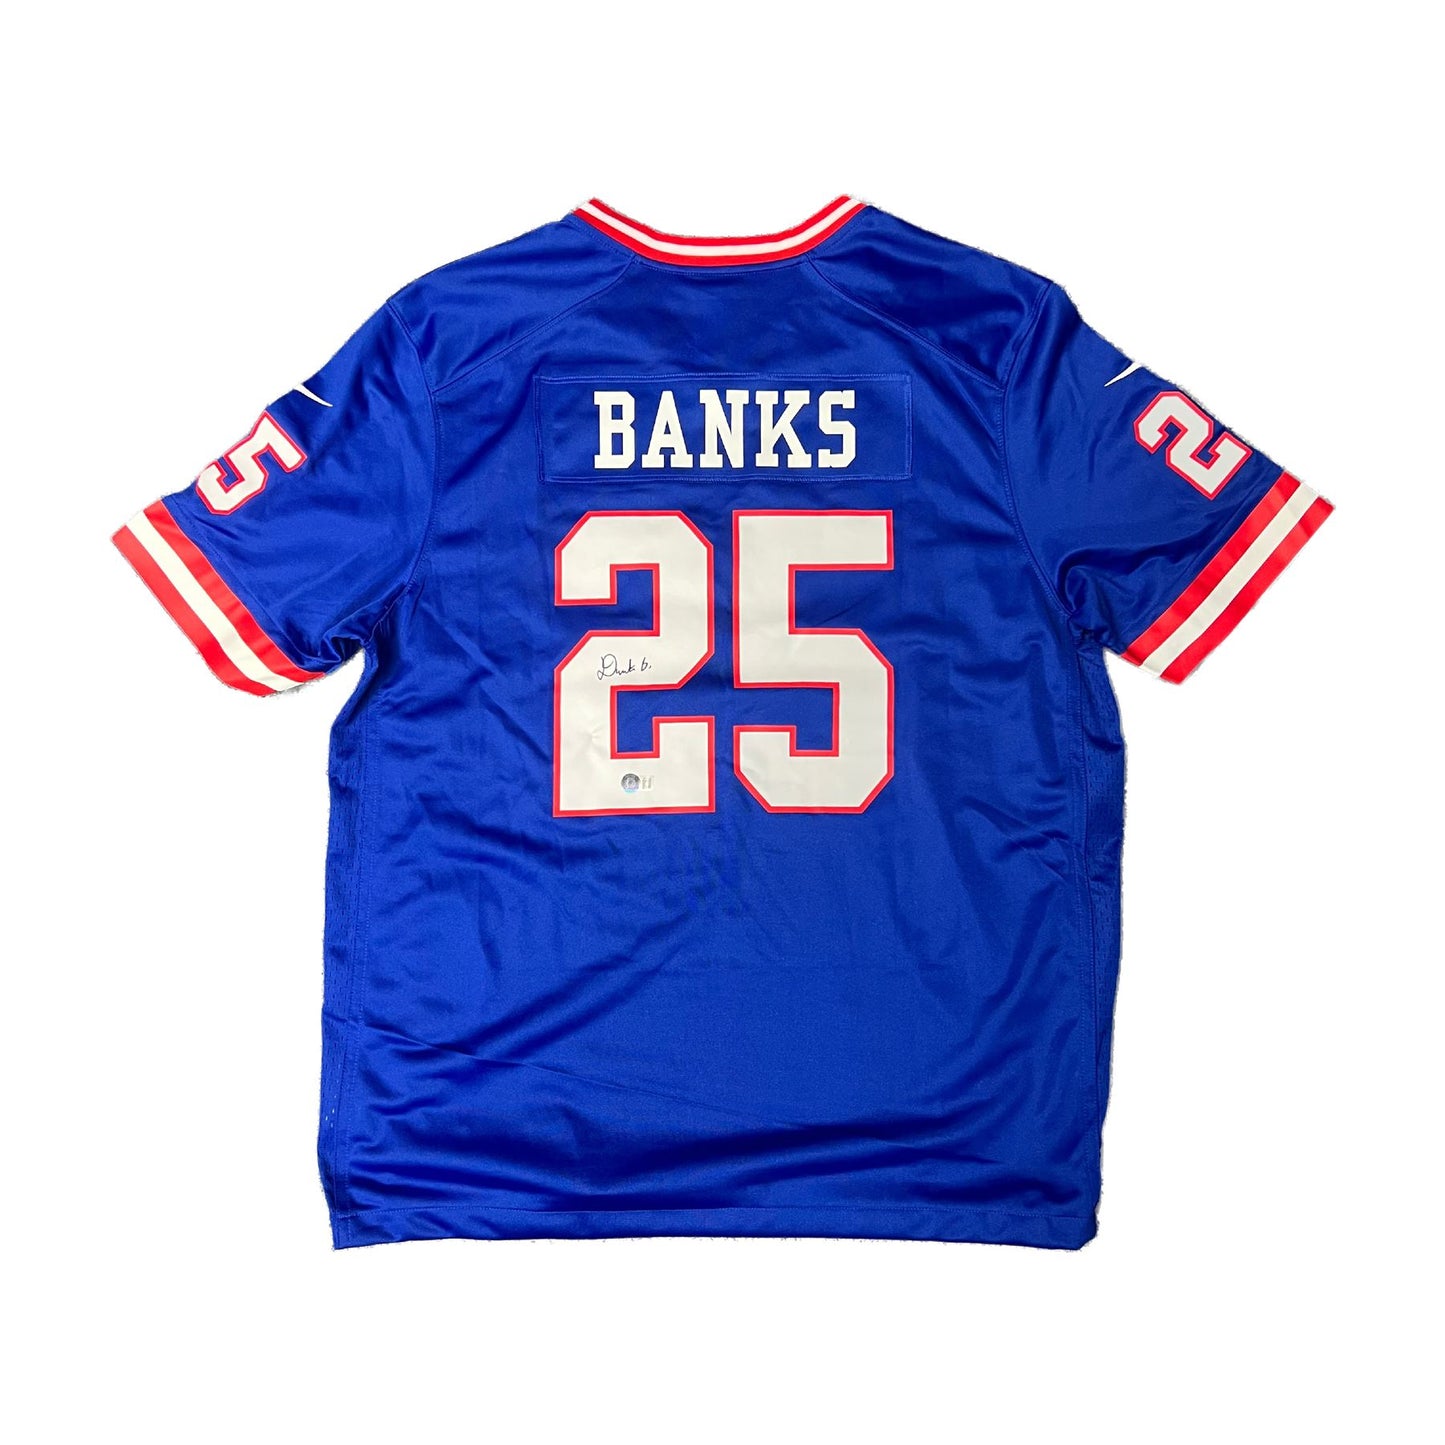 Deonte Banks Autographed Nike Blue & Red Auth Jersey - Beckett Auth